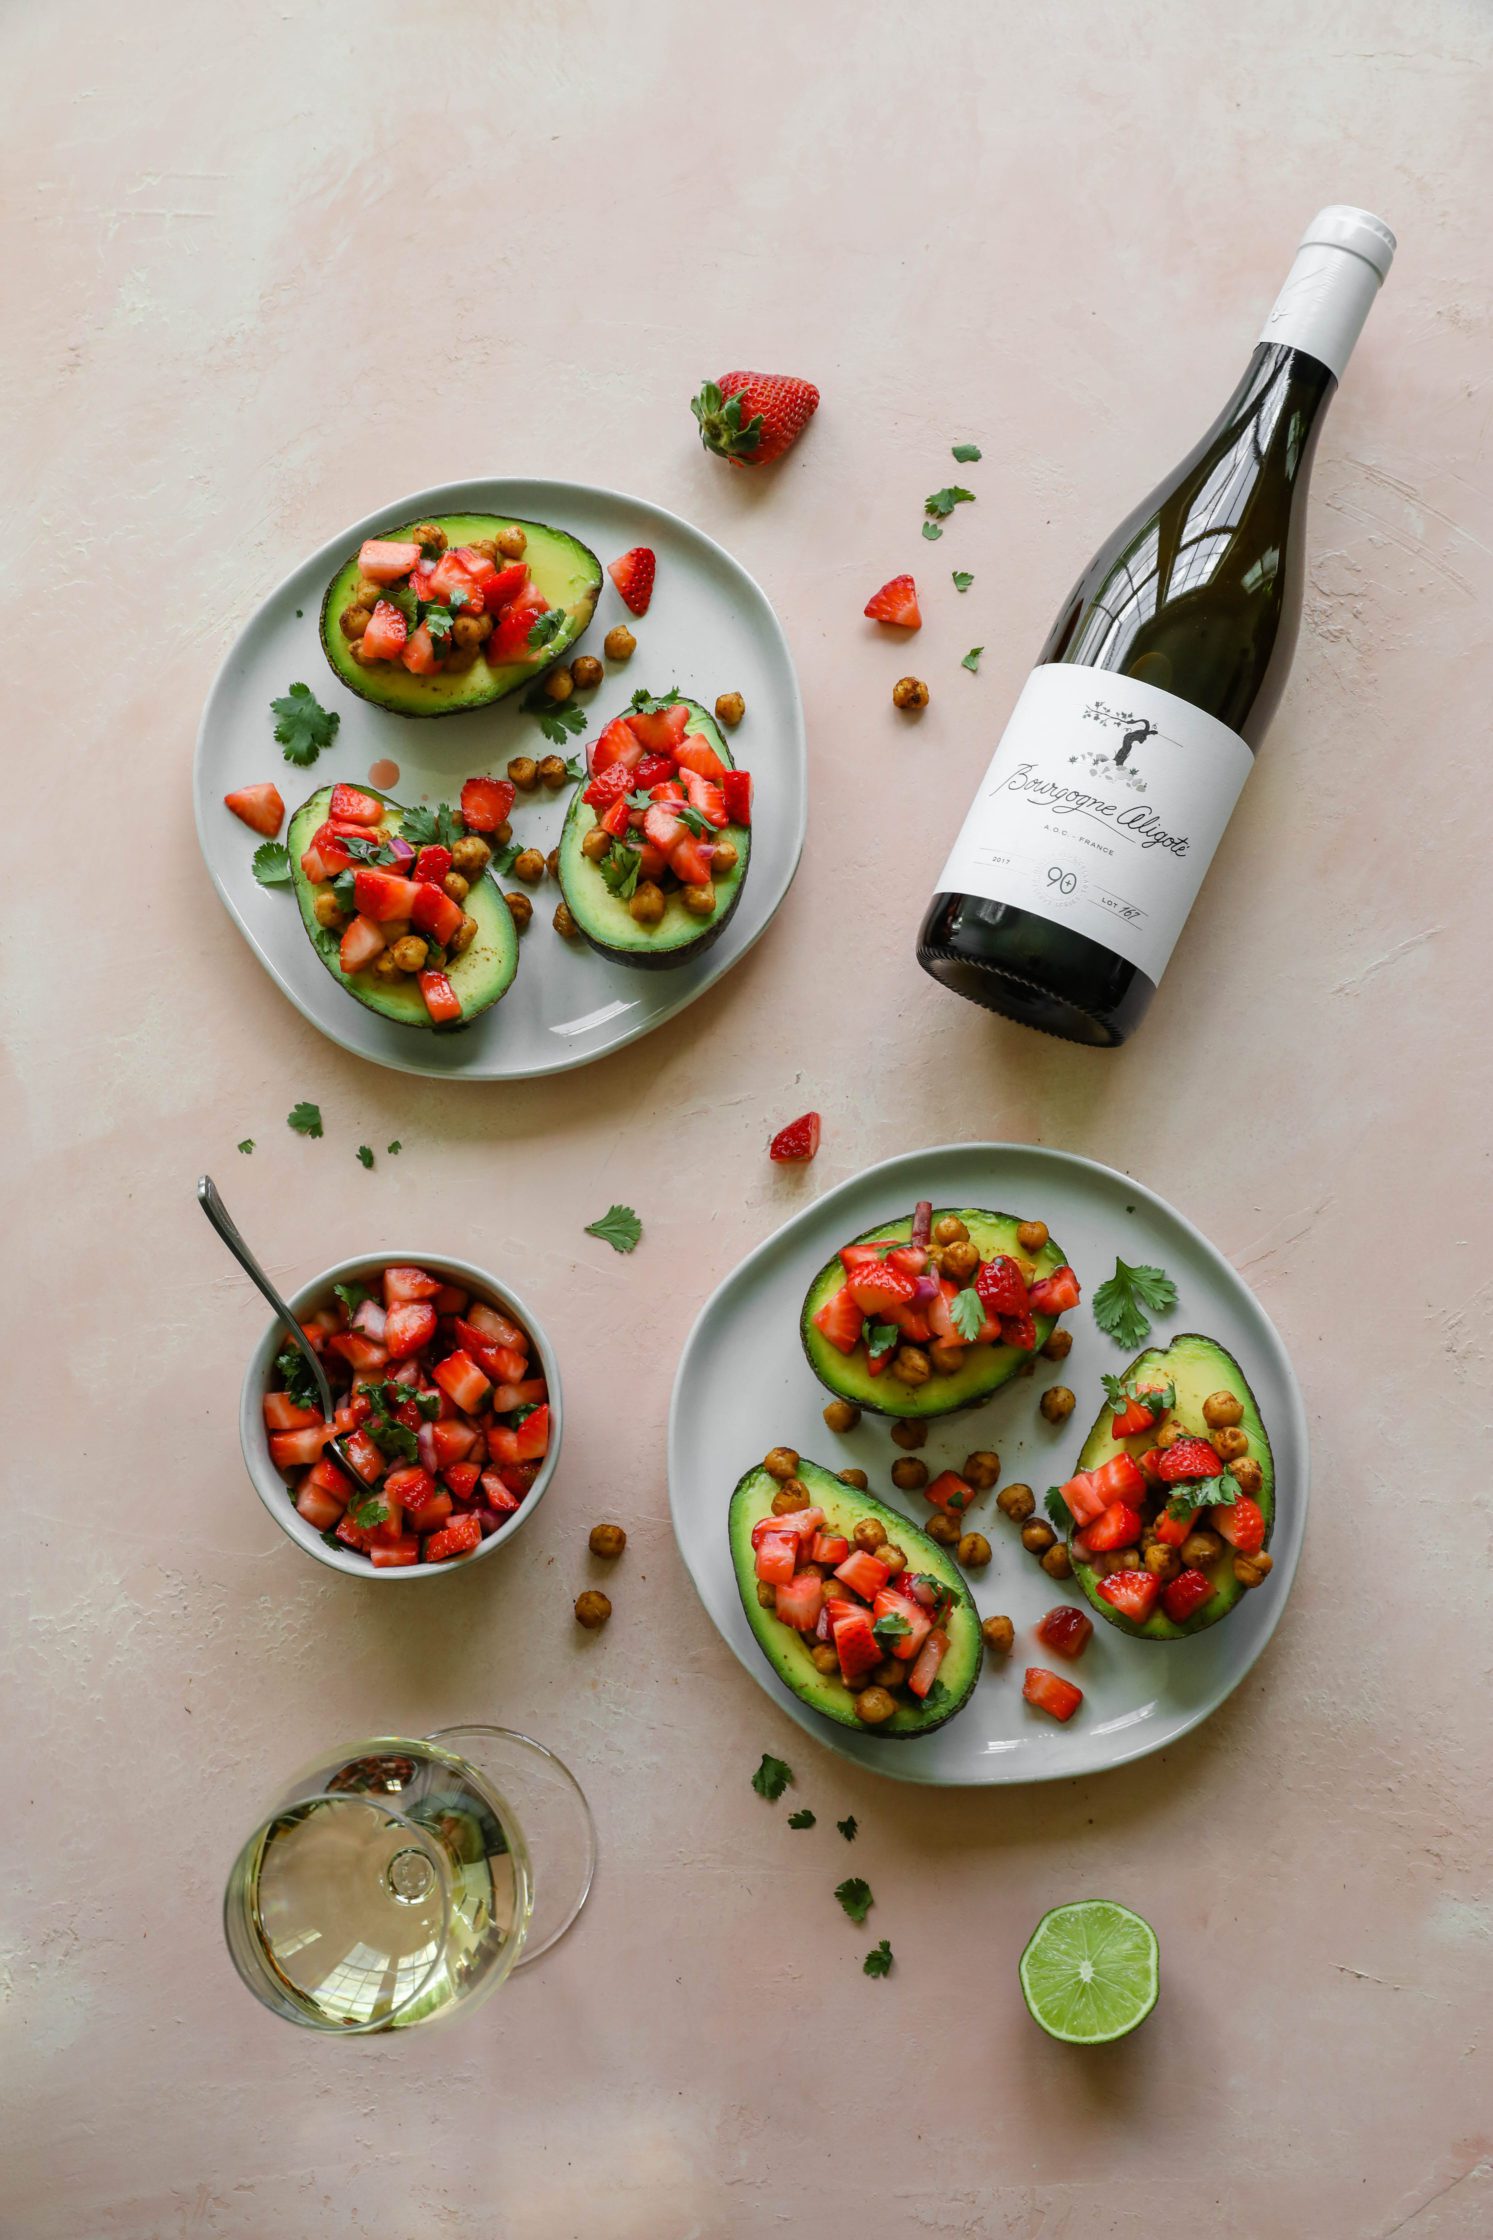 Sweet & Savory Avocado Boats with Strawberry Salsa by Flora & Vino 